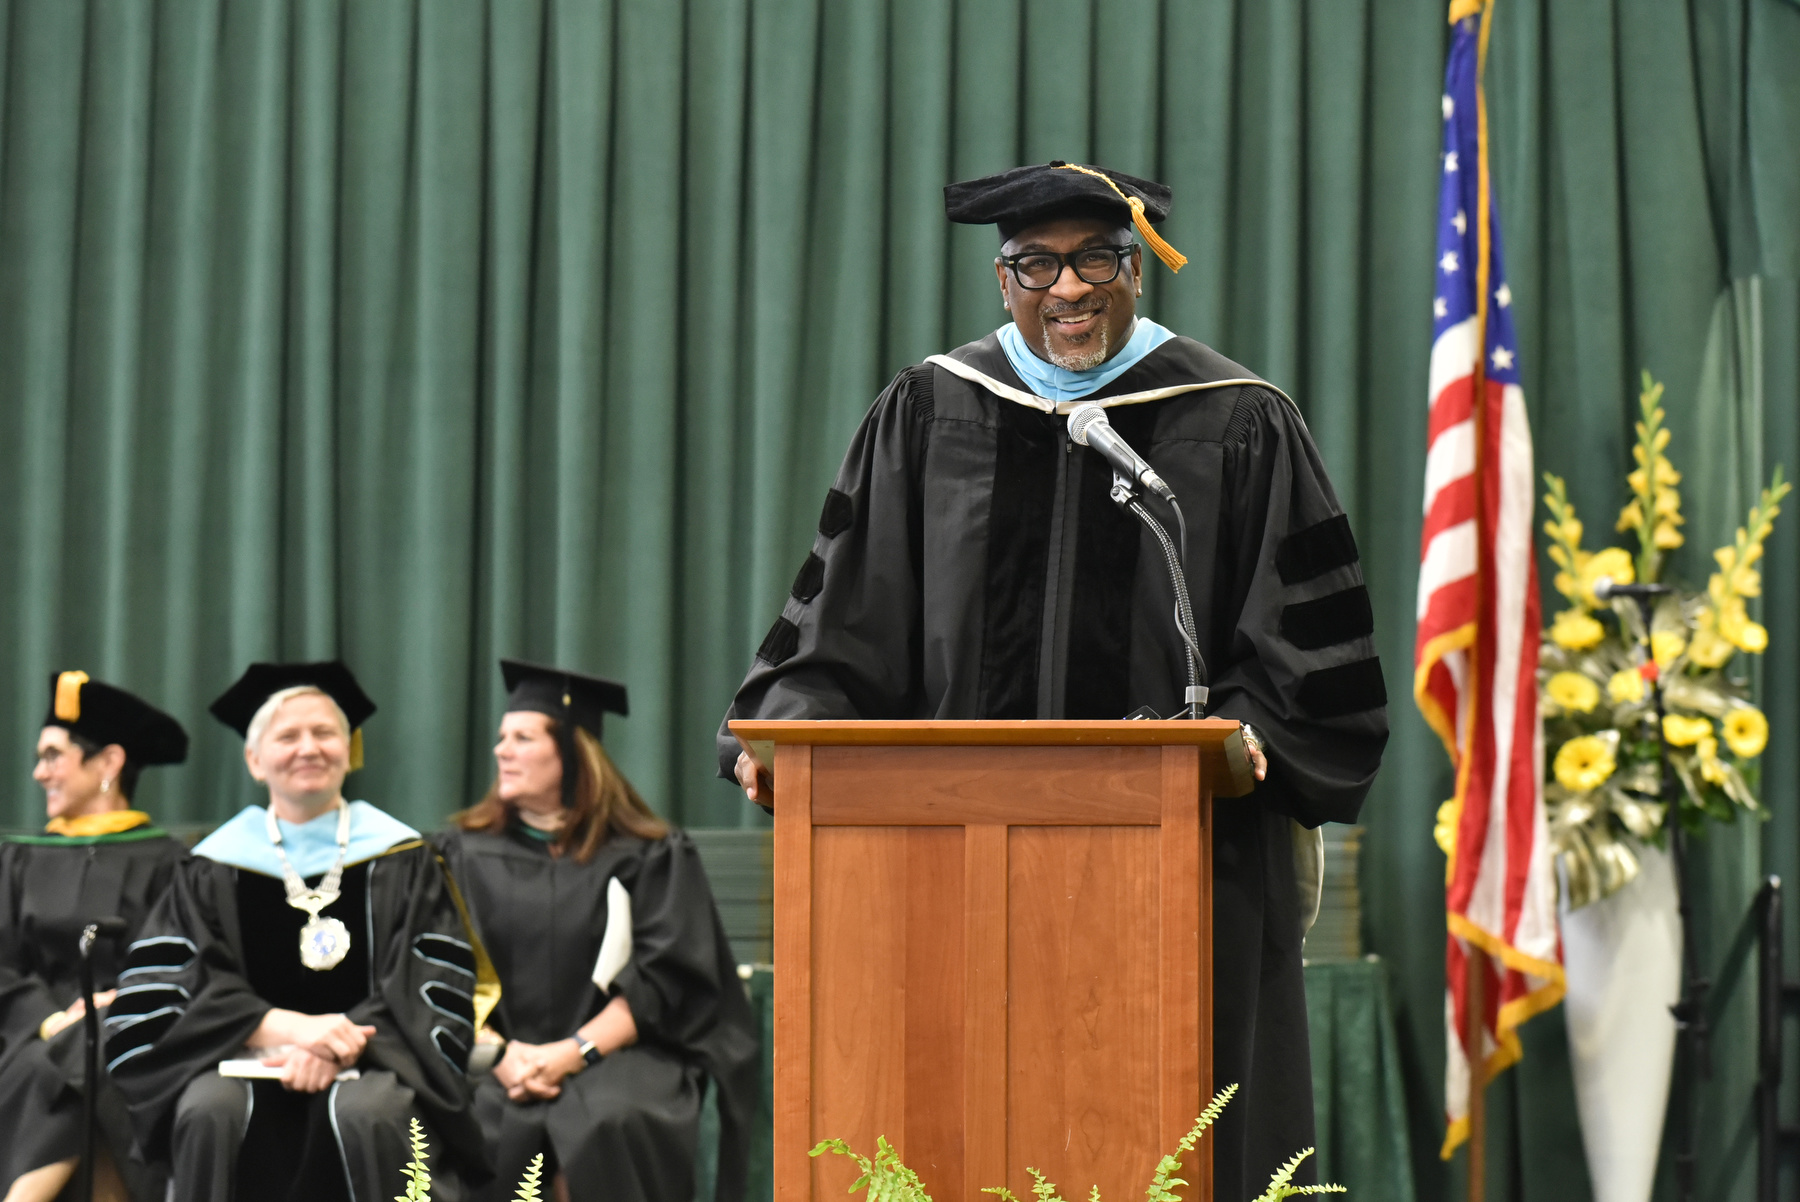 Robert Simmons, head of social impact and STEM programs for Micron Technology and the Micron Foundation spoke at the 4 p.m. ceremony for the School of Communication, Media and the Arts and the School of Education.